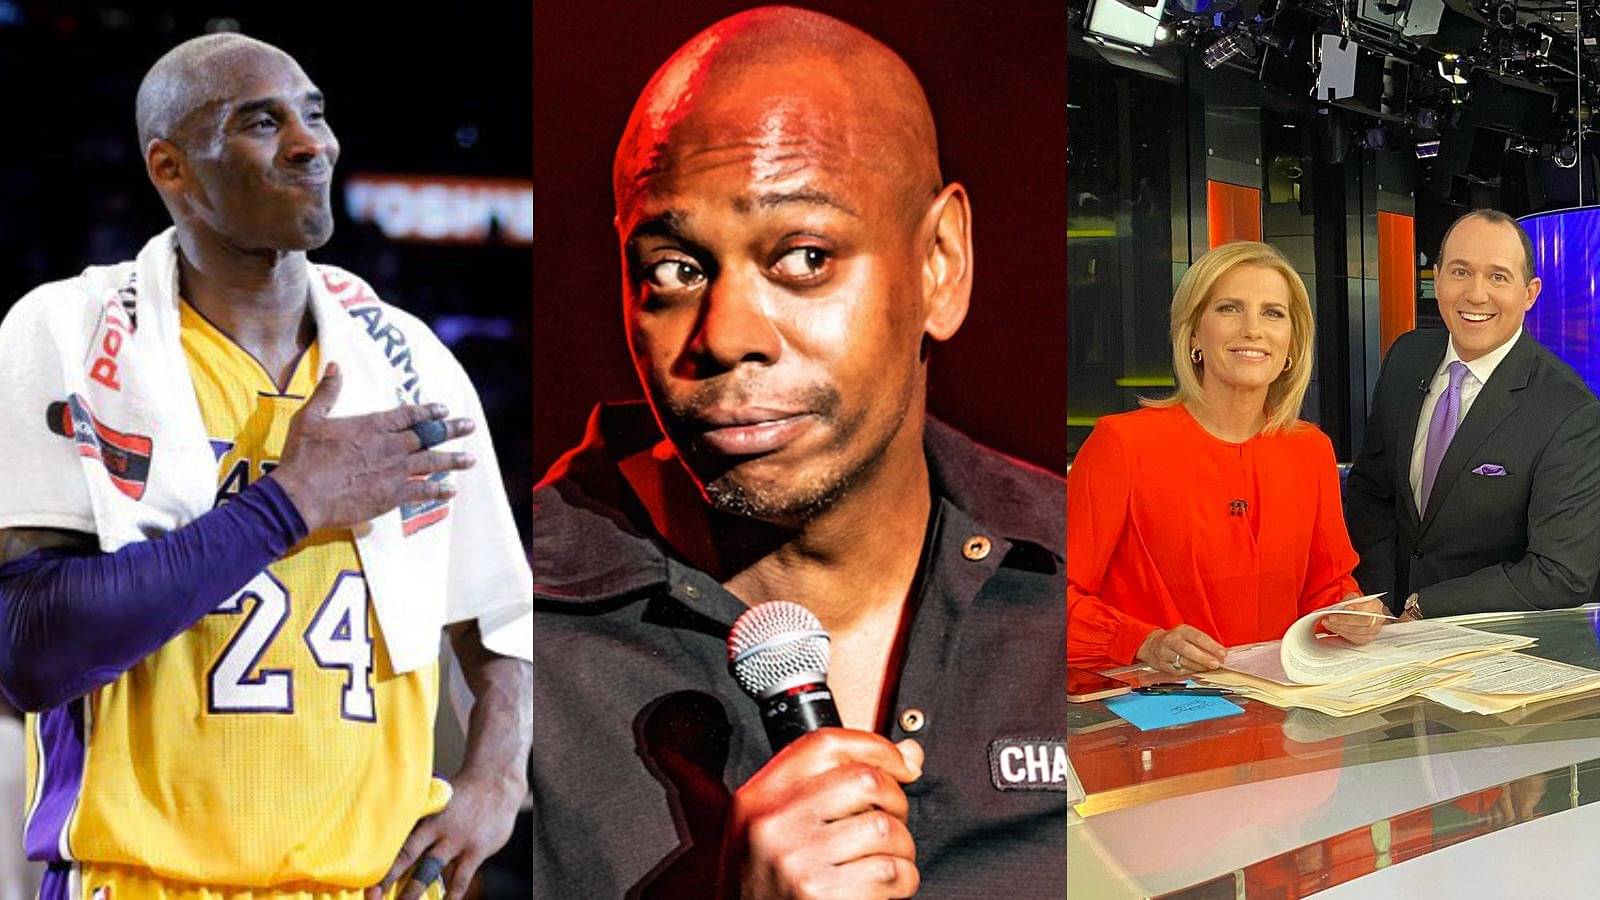 “That idiot a*s bi—h said ‘shut up and dribble’, I remembered Kobe Bryant dribbling and saving this god-damned country”: When Dave Chappelle spoke about Lakers Star’s last game in the NBA